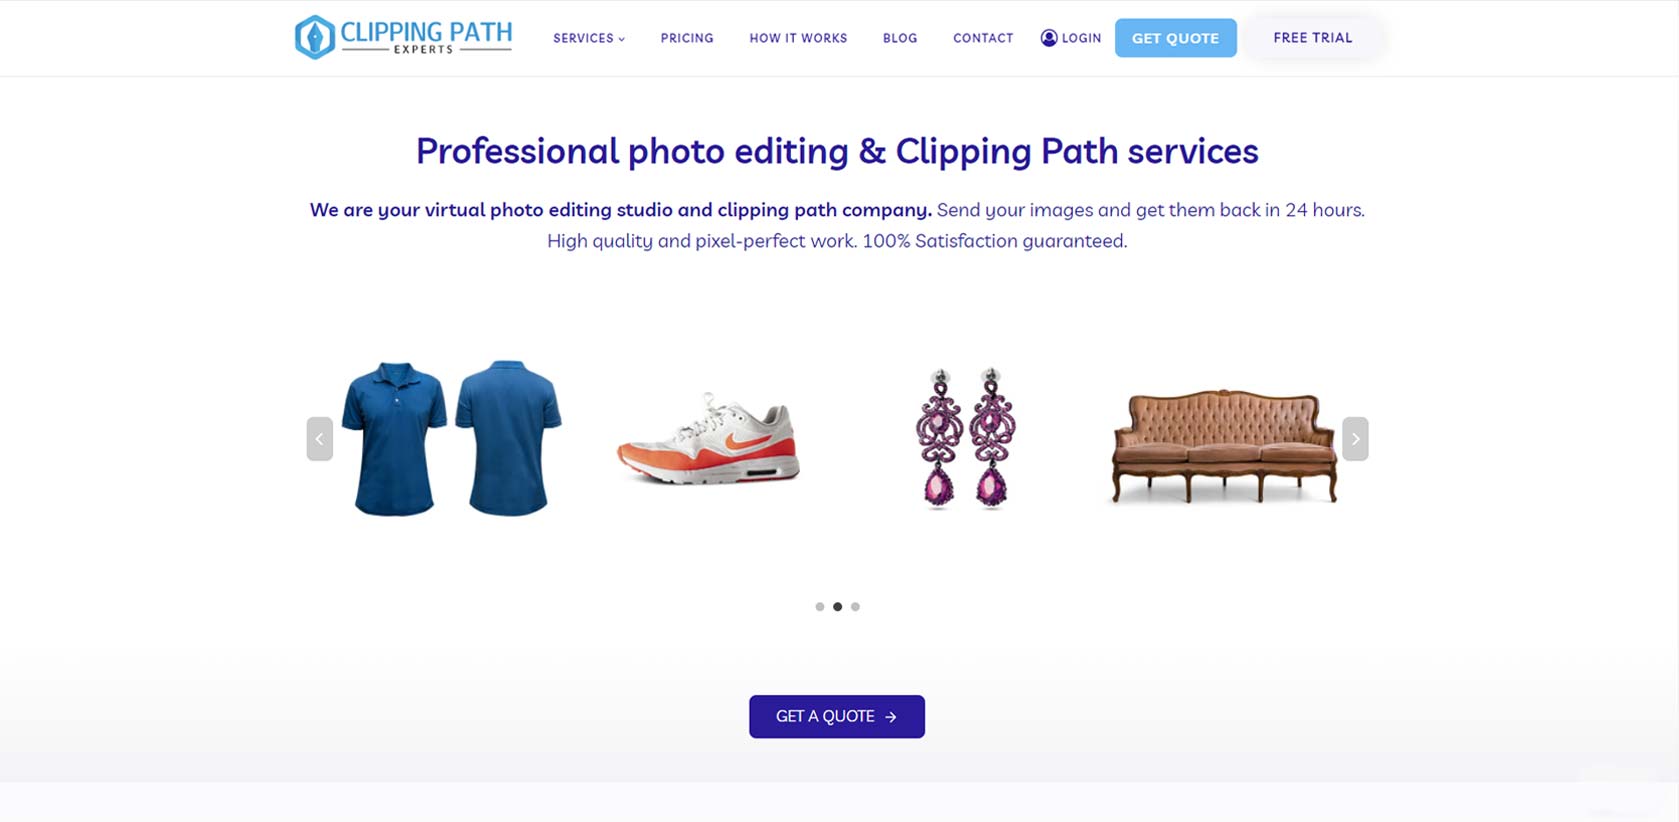 Clipping Path Experts